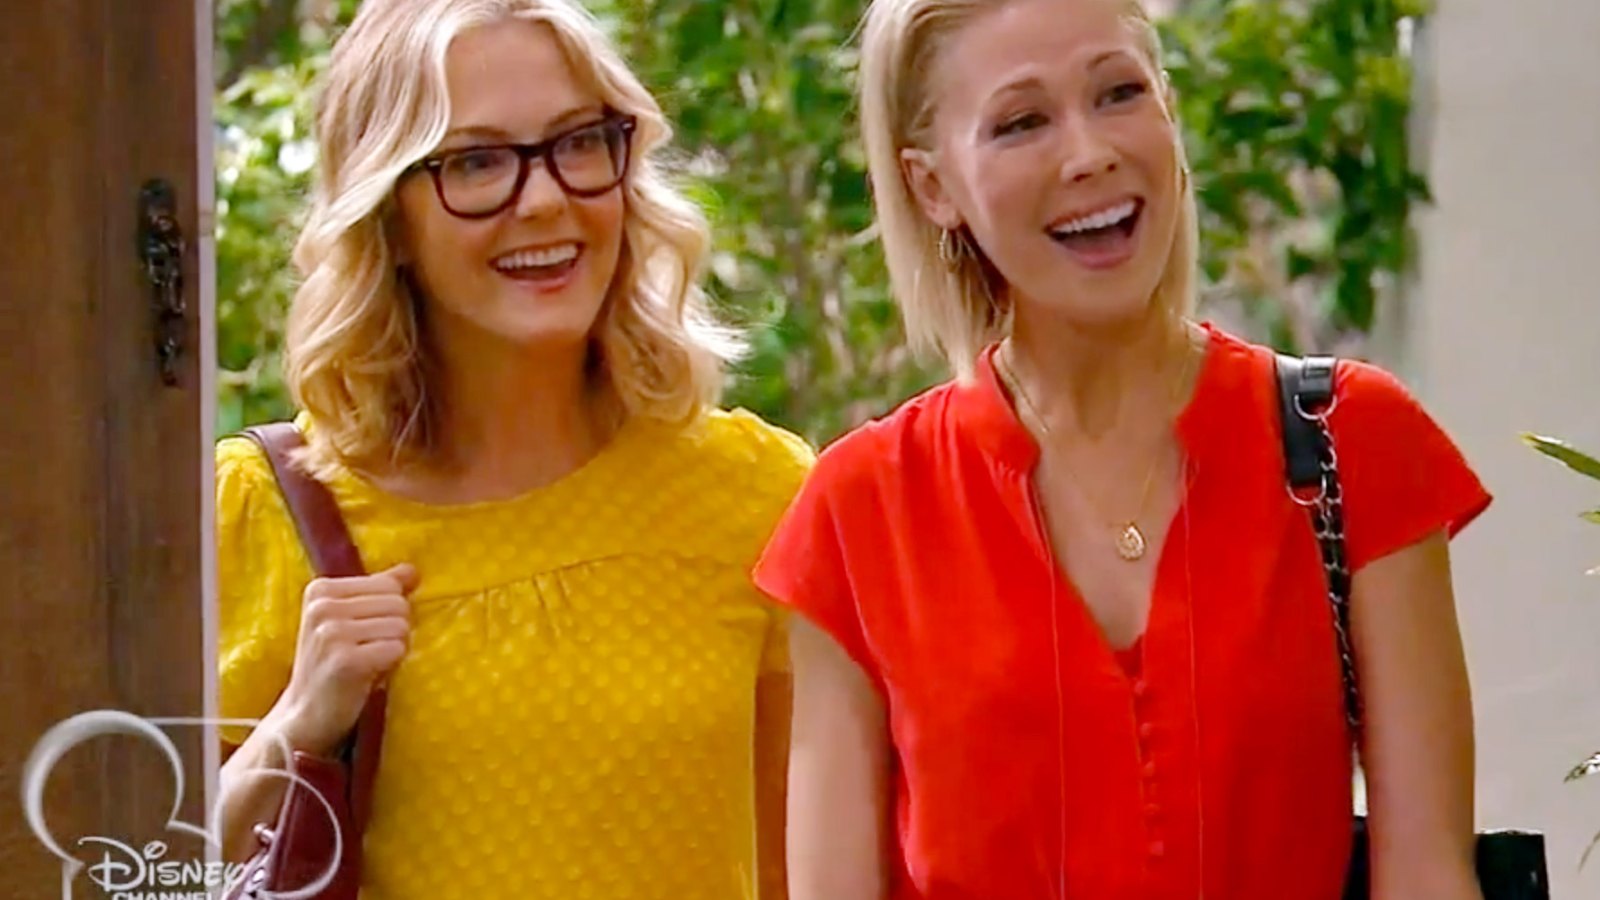 Disney Channel's Good Luck Charlie introduces a lesbian couple